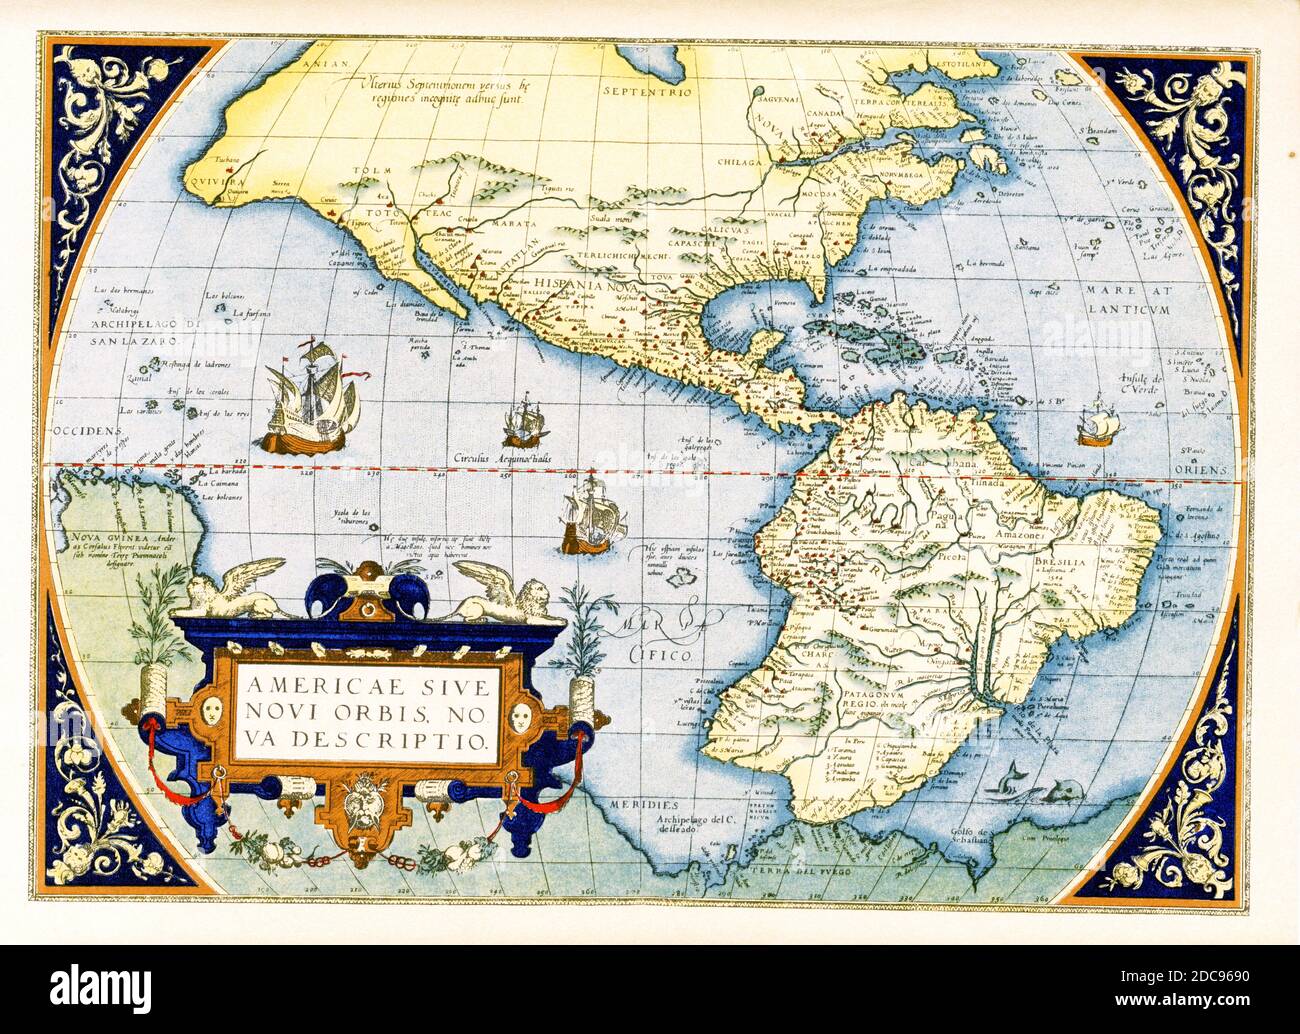 Abraham Ortelius’s map of the Americas — Americae sive Novi Orbis, Nova Descriptio.   Originally published in 1570, the first plate of this map was based off of Gerard Mercator’s multi-sheet map of the world from 1569. Engraved by Frans Hogenberg, this became one of the most famous influential maps of the New World and the basis for a great deal of future cartography of the Americas.  Abraham Ortelius (1527-1598) was a Dutch cartographer, geographer, and cosmographer, conventionally recognized as the creator of the first modern atlas, the Theatrum Orbis Terrarum. Stock Photo